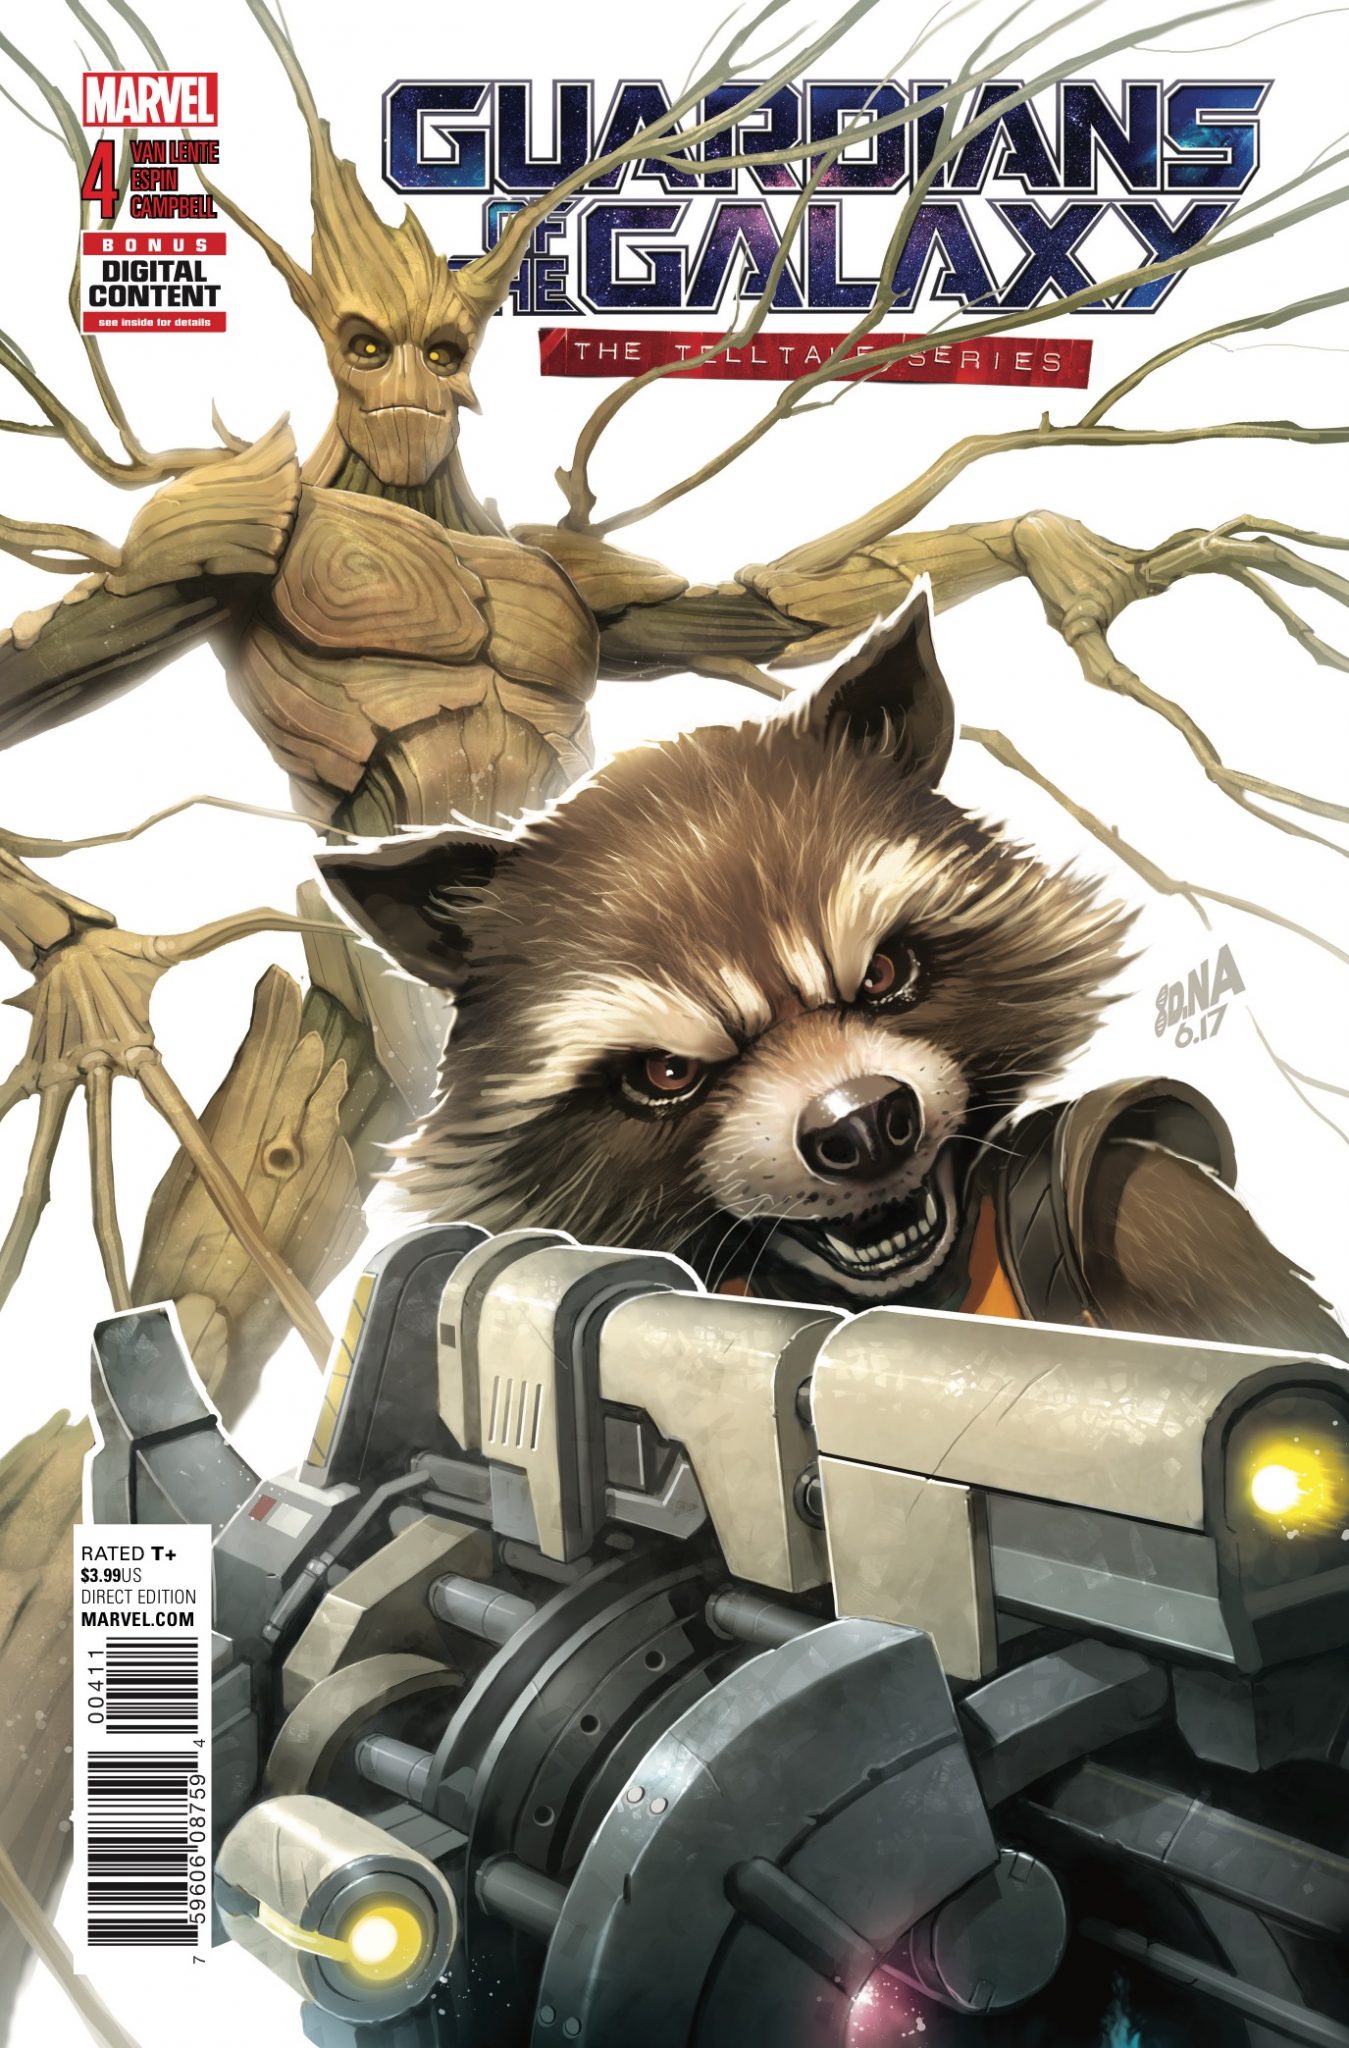 Marvel Preview: Guardians of the Galaxy: Telltale Games #4